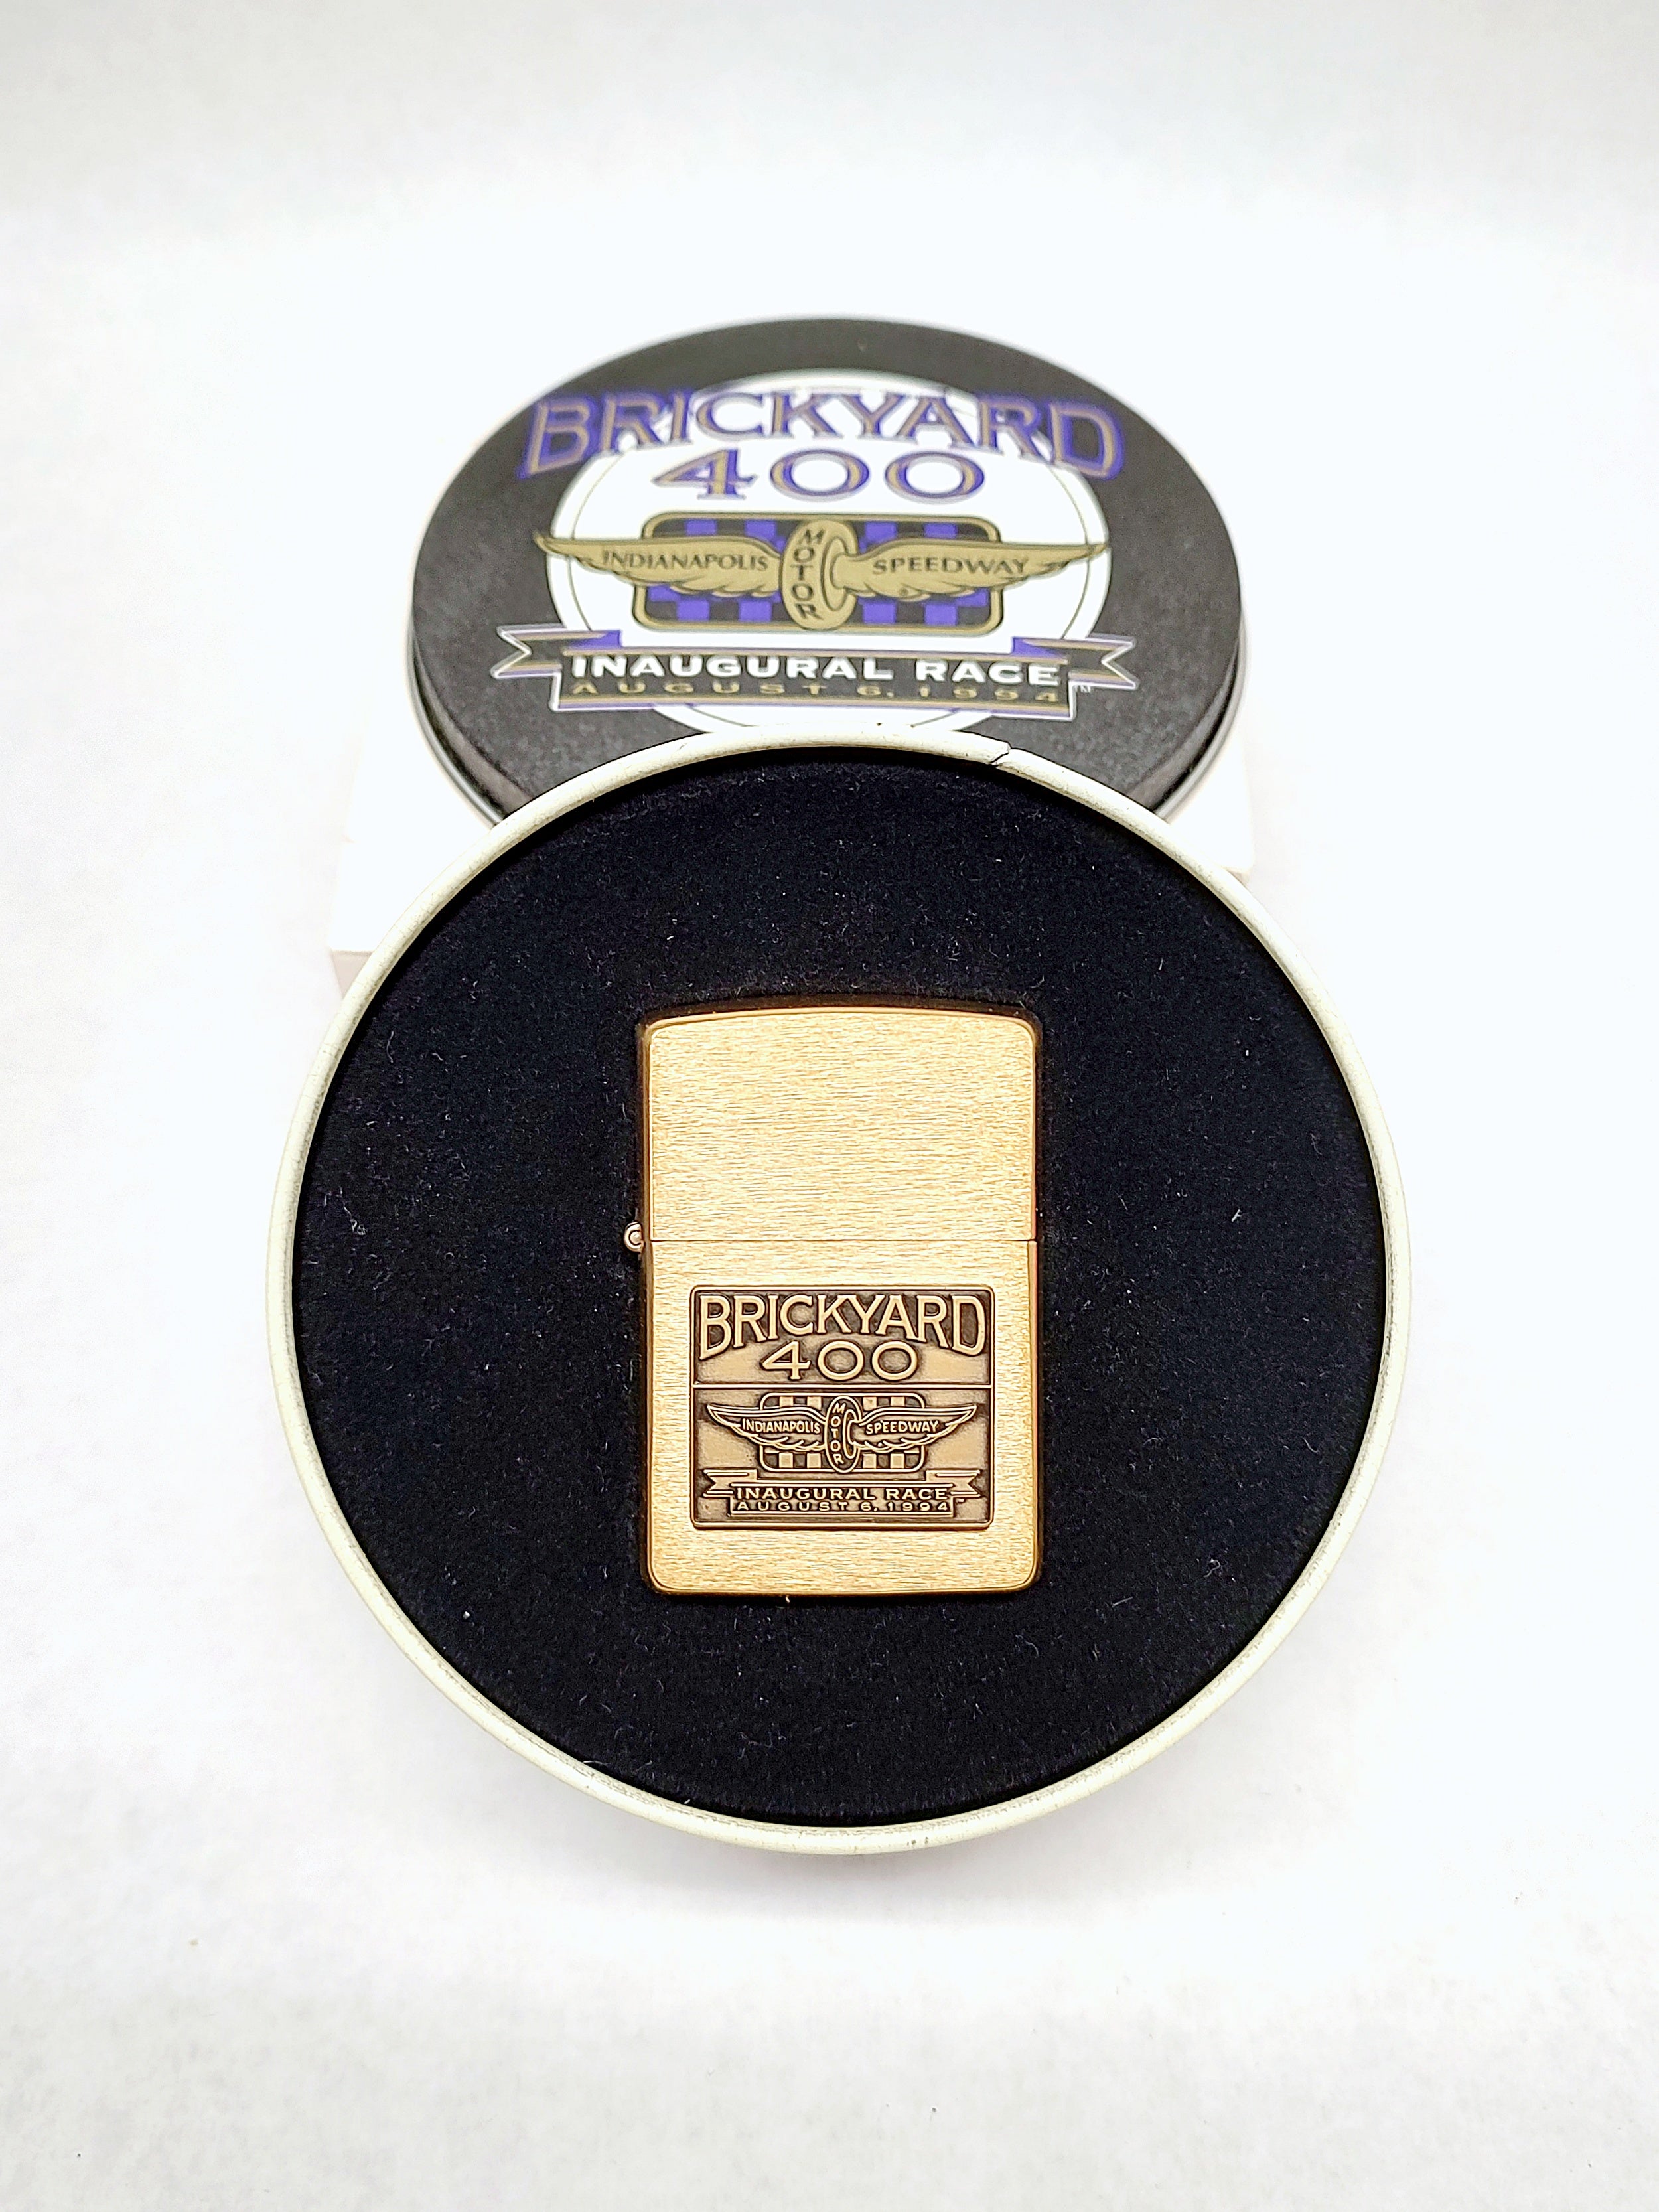 New 1994 Brickyard 400 Inaugural Race Zippo Lighter in Collectible 